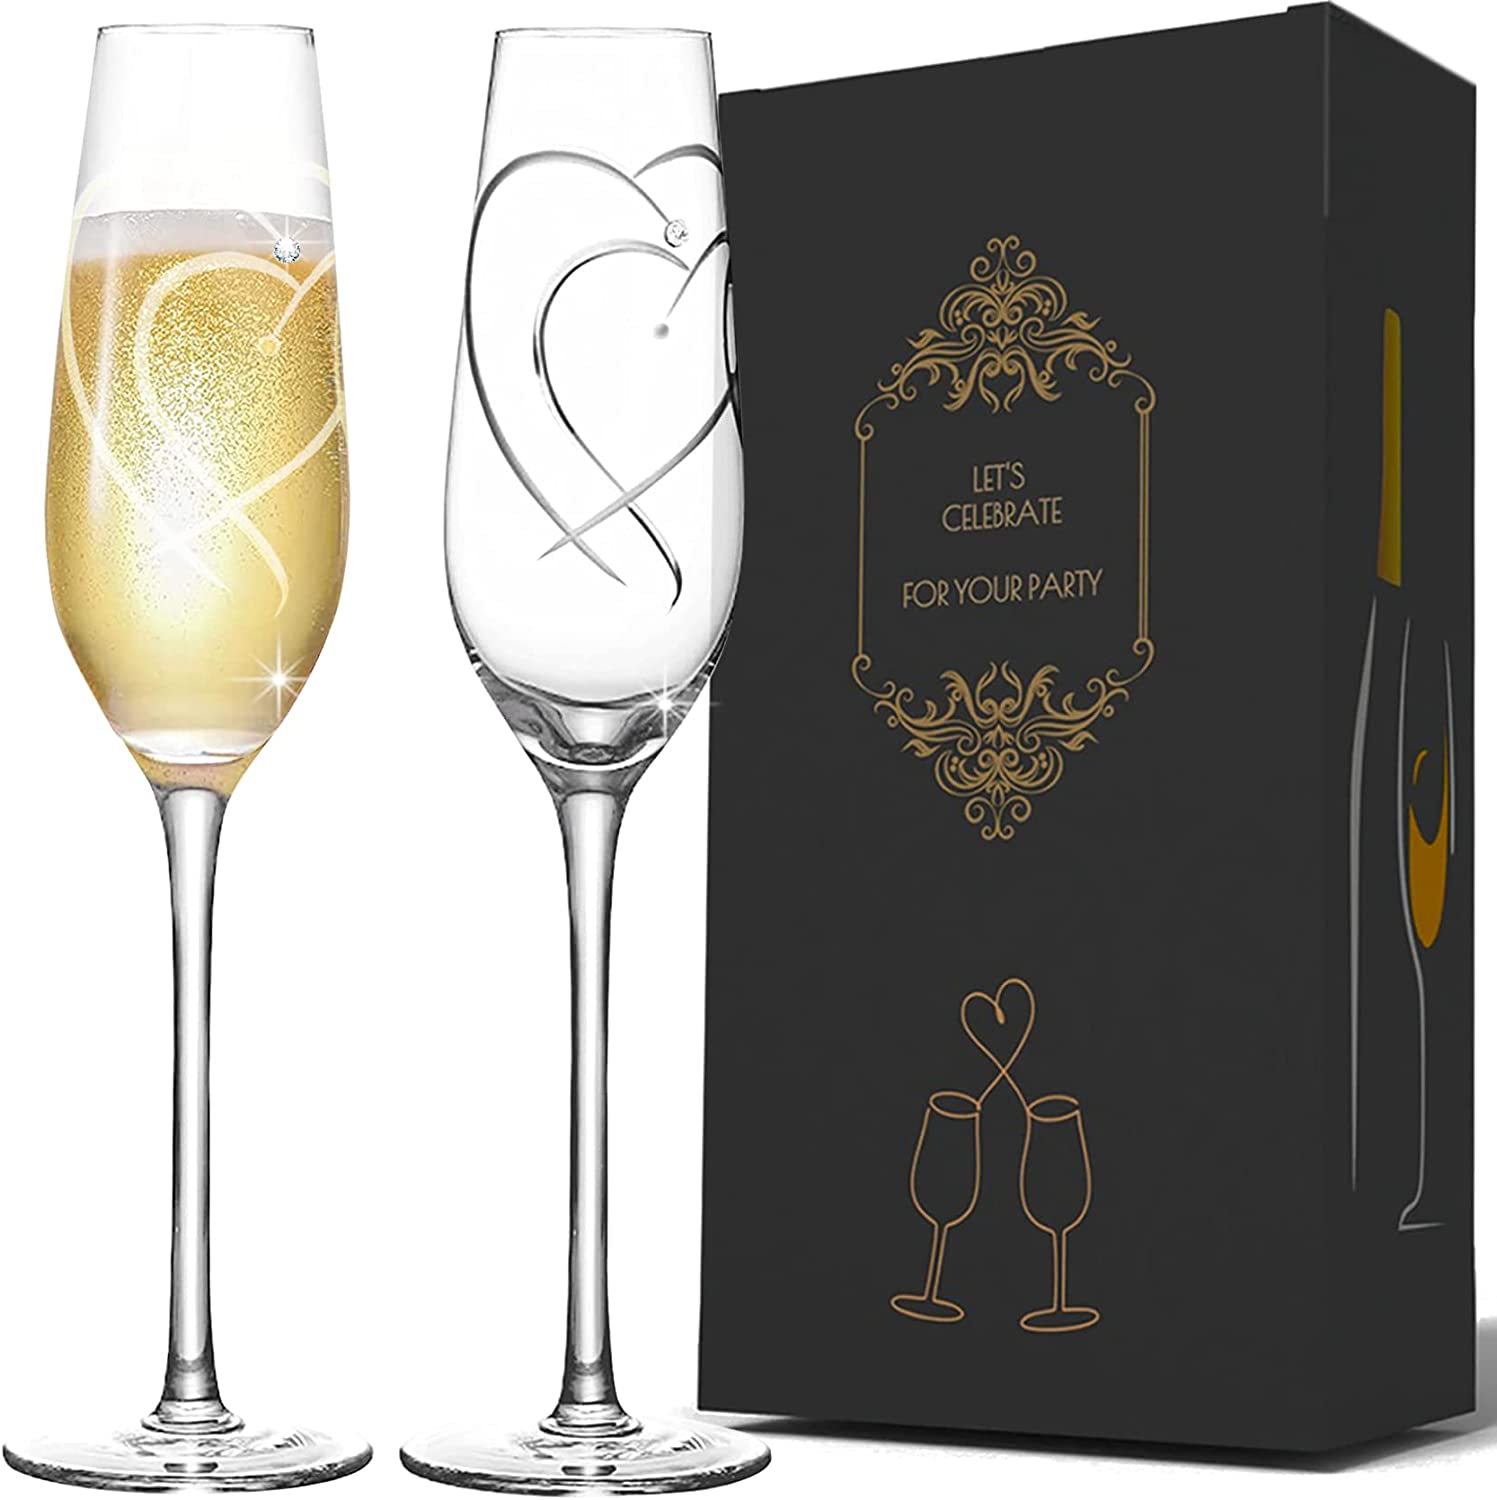 Bride and Groom Champagne Flutes set of 2, Personalization Crystal Toasting Champagne Glasses Etched With 2 Heart for Wedding Couples Engagement gift - VARLKA